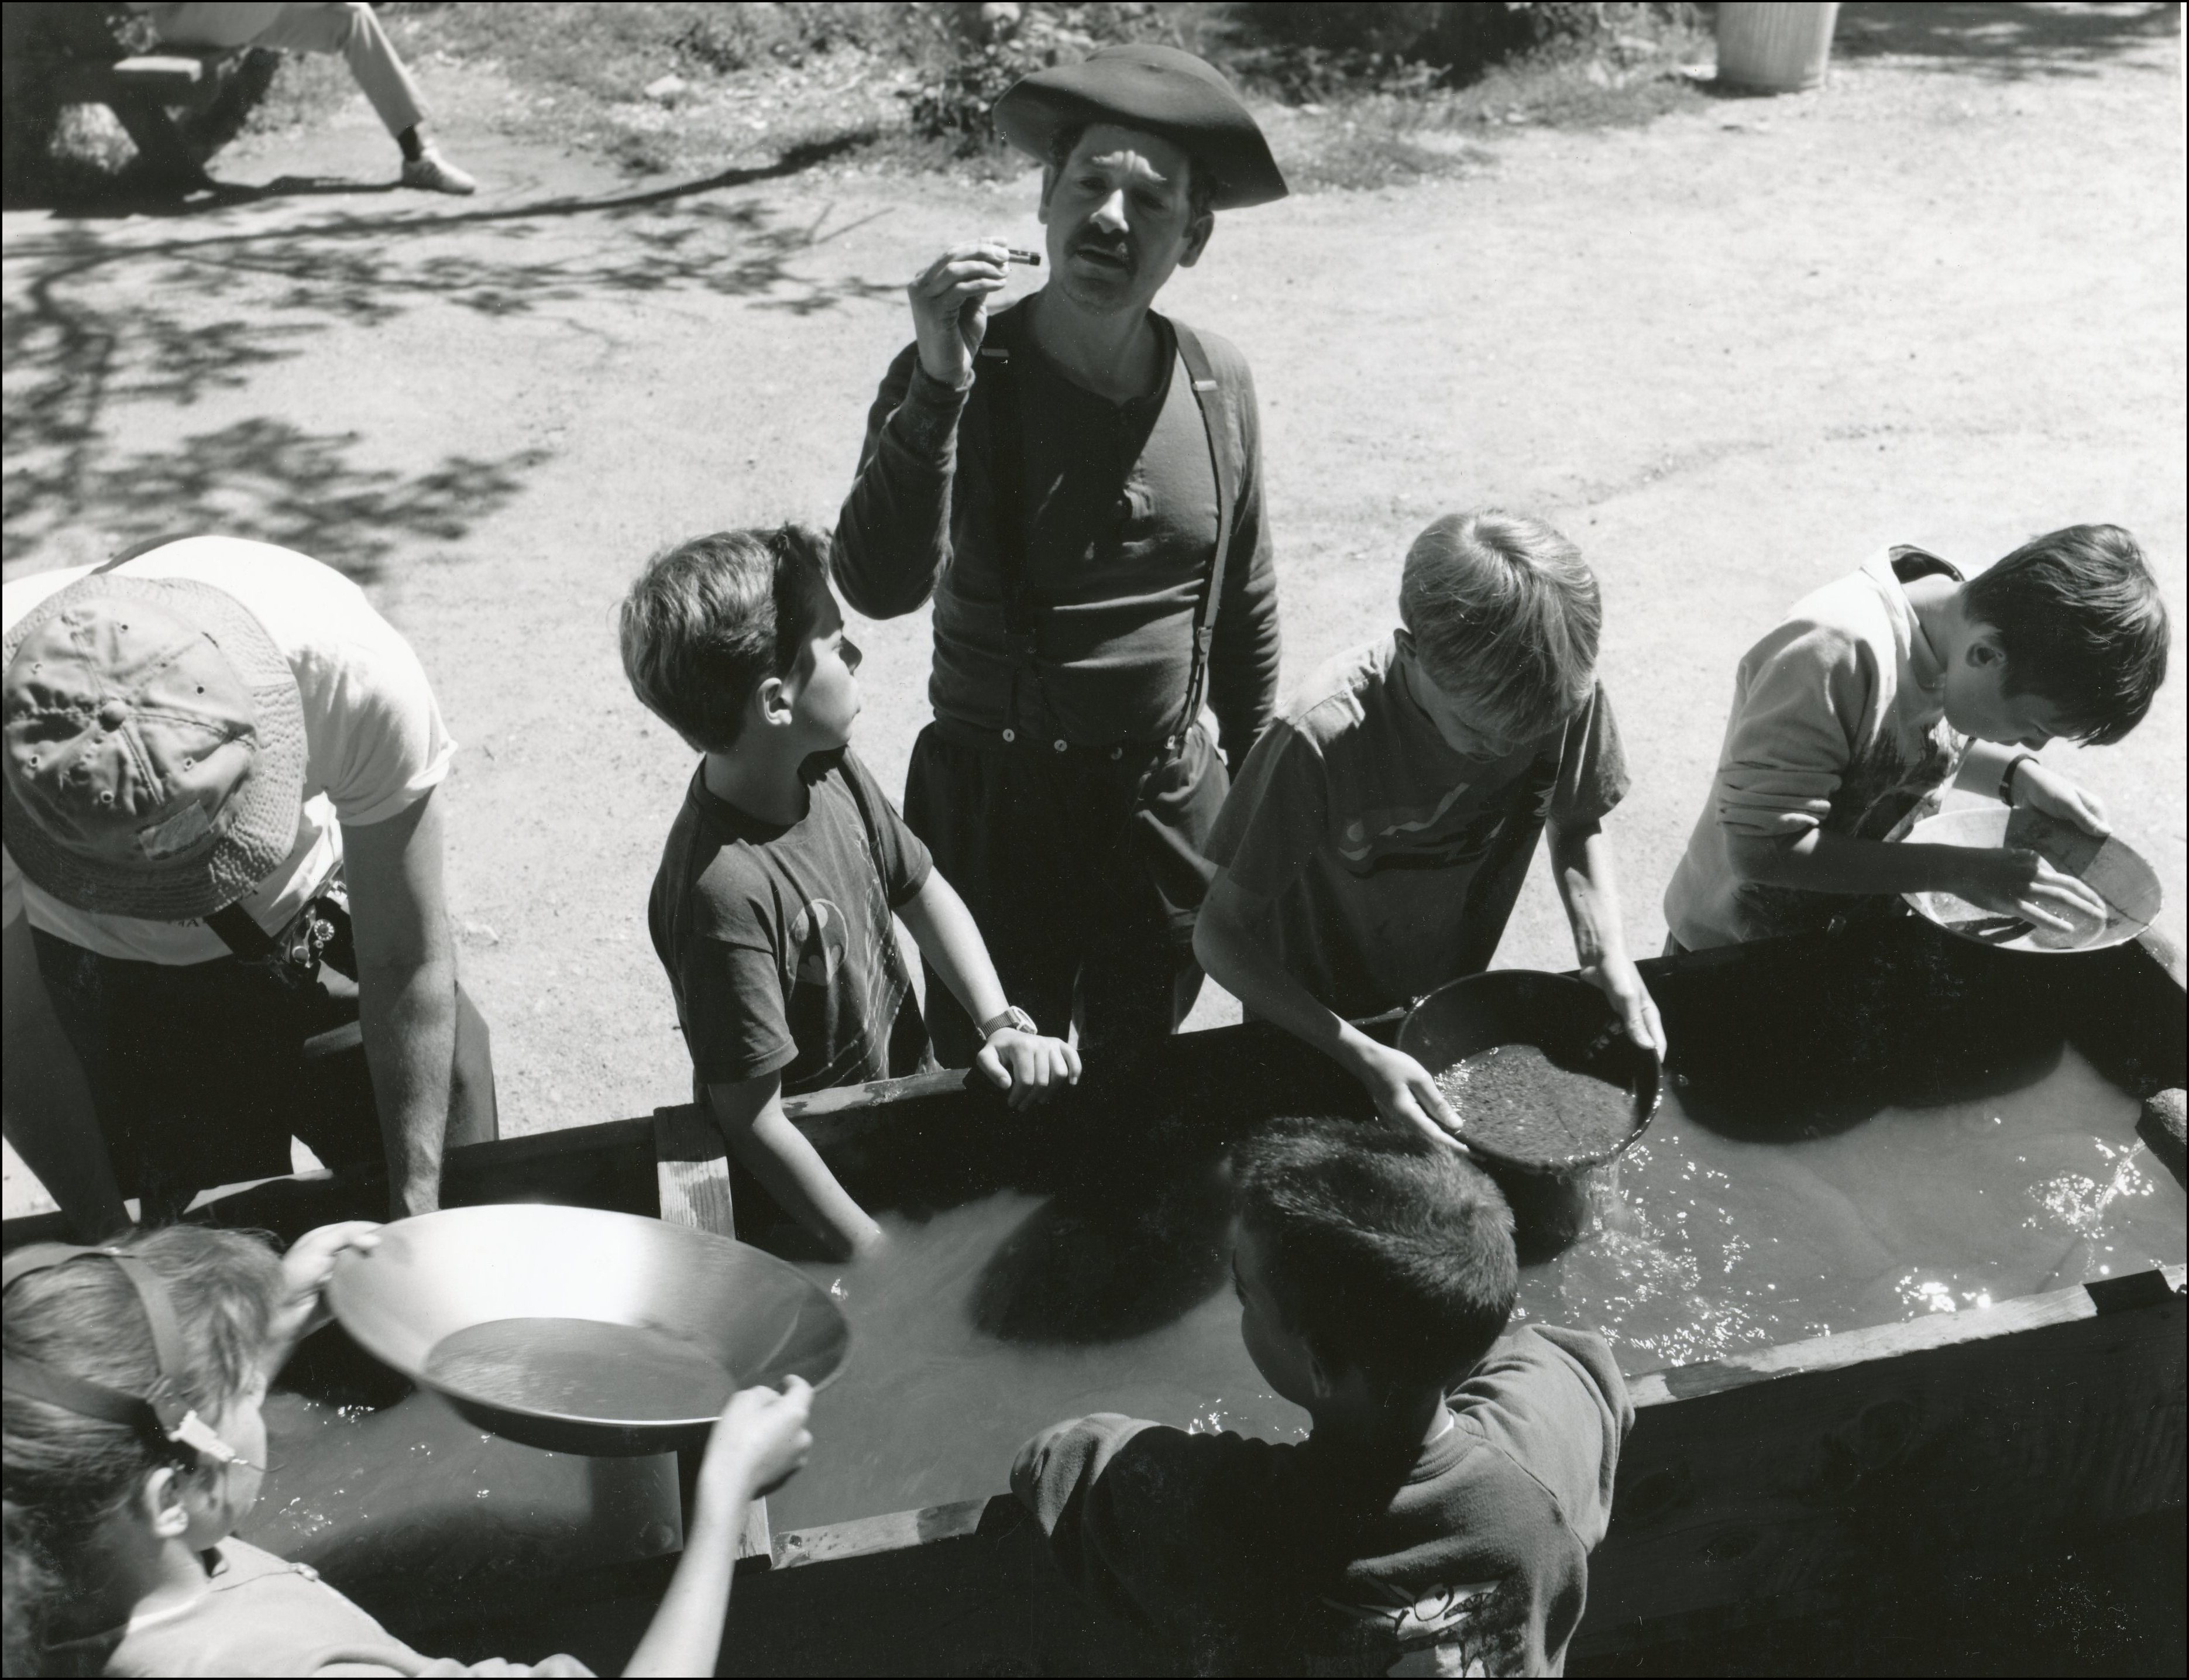 A group of kids around a long trough with water in it panning for gold.